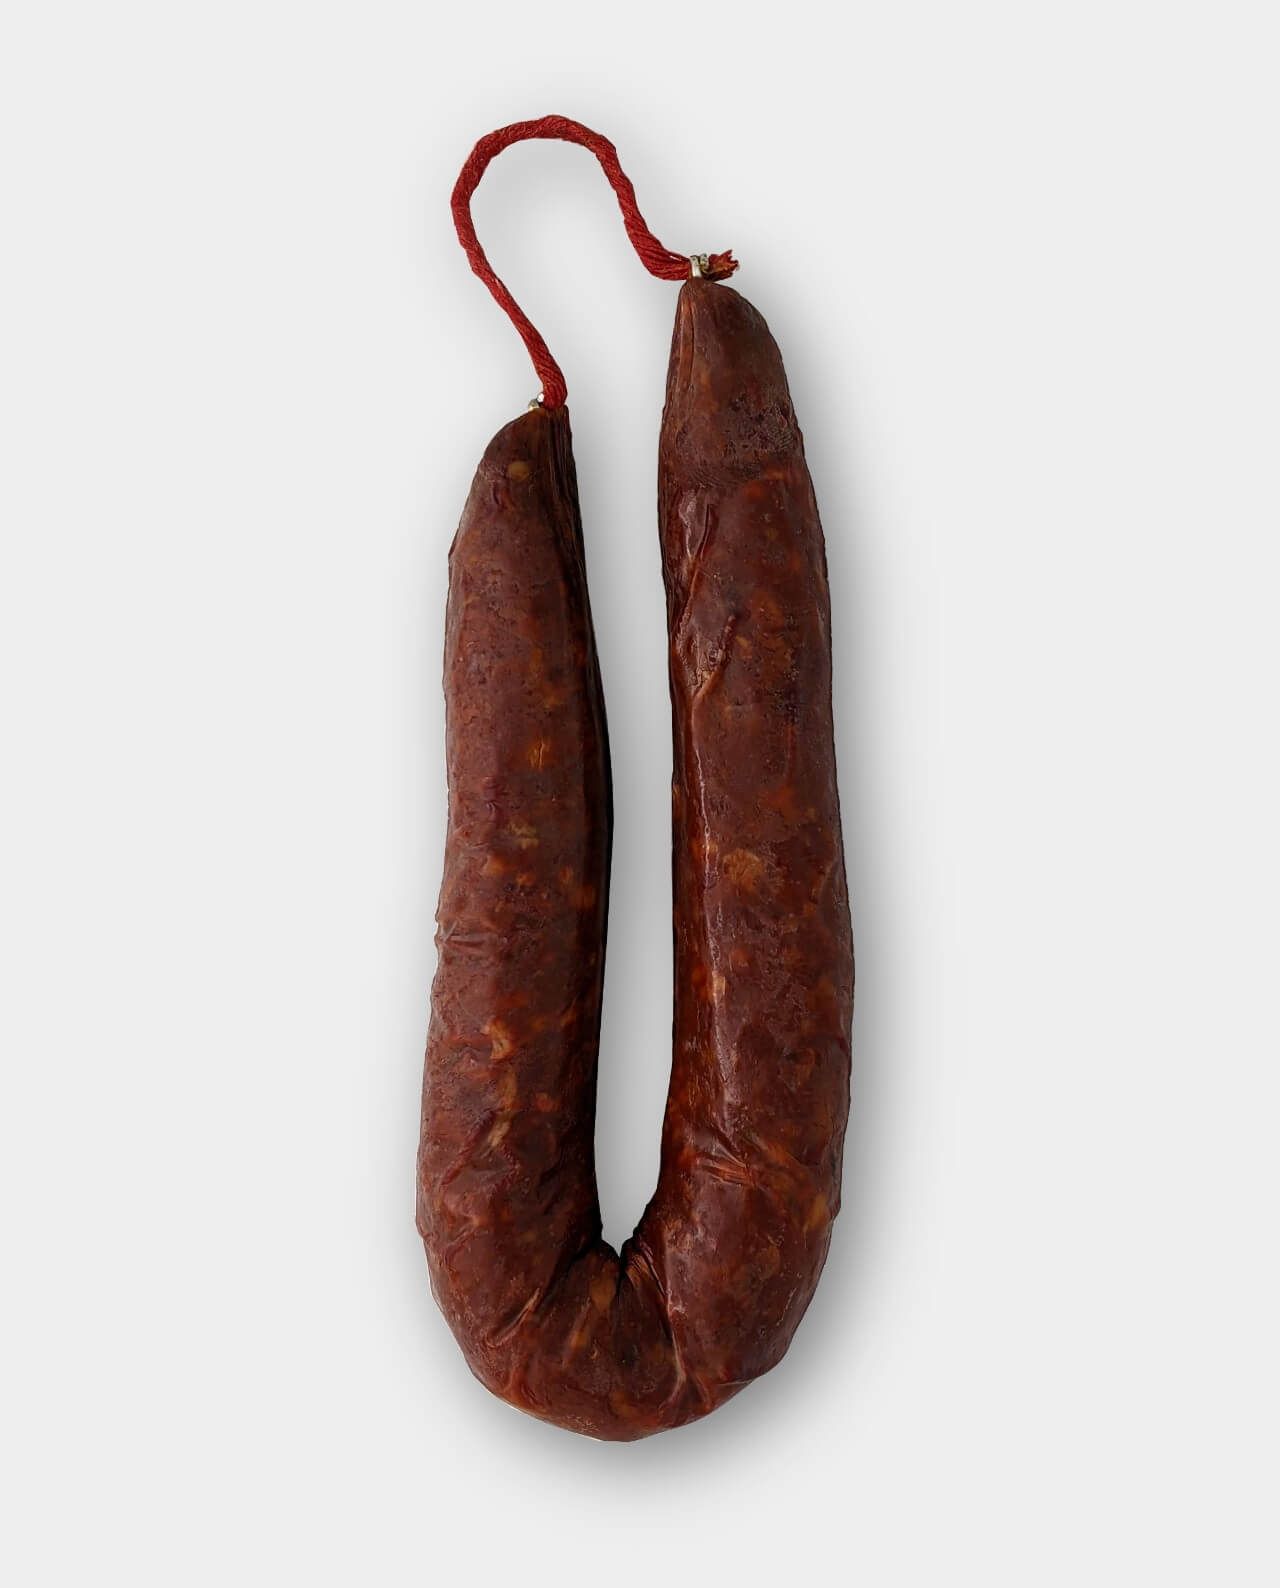 Null 1 package of 30 spicy sausages